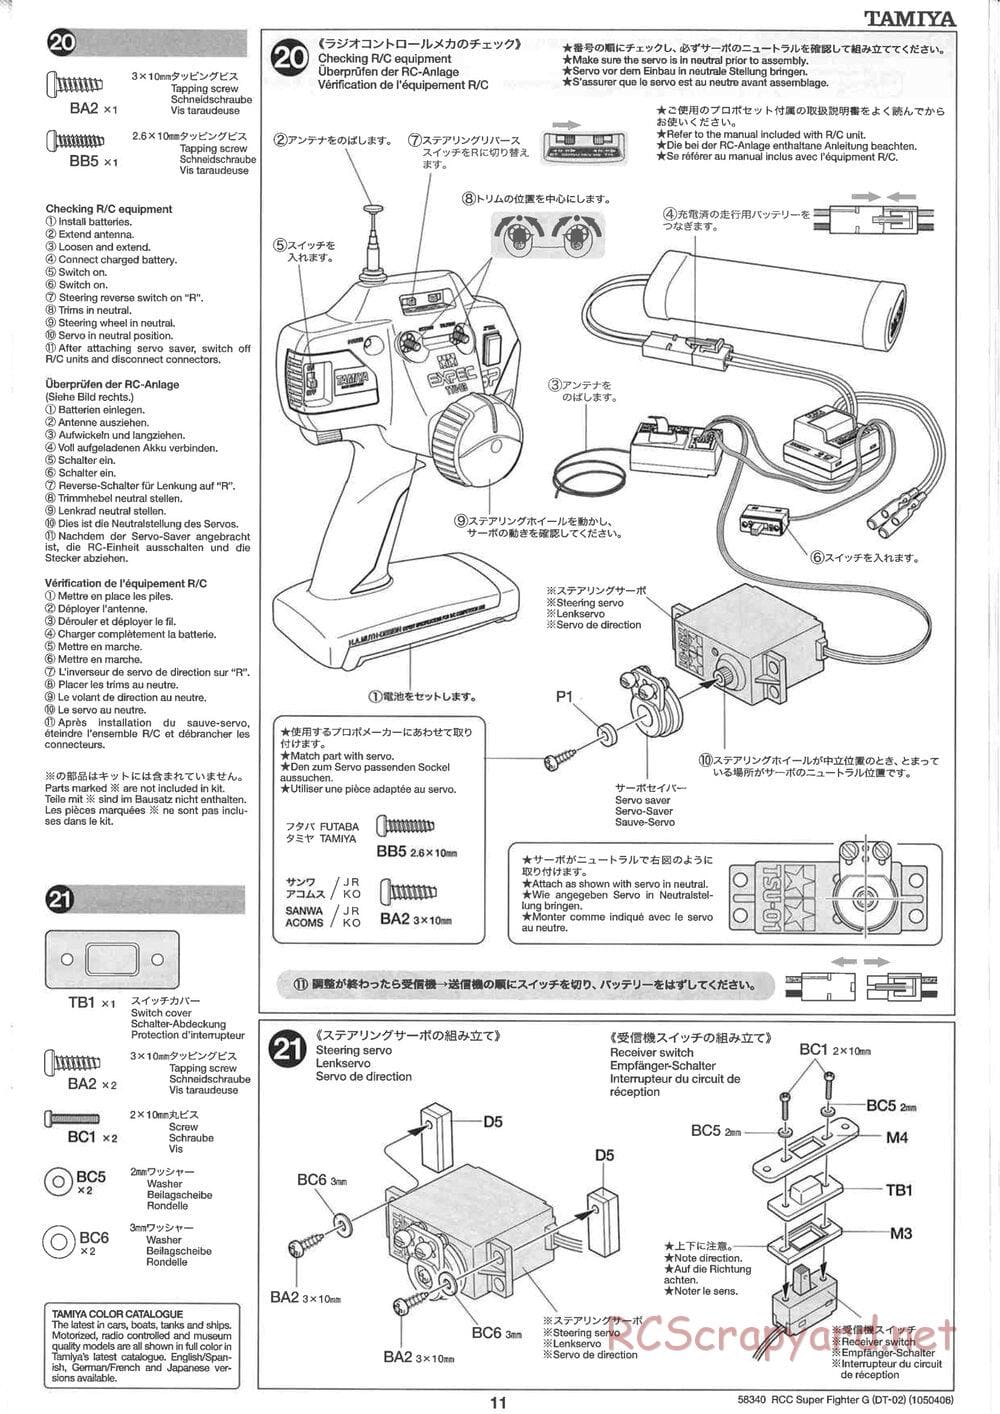 Tamiya - Super Fighter G Chassis - Manual - Page 11